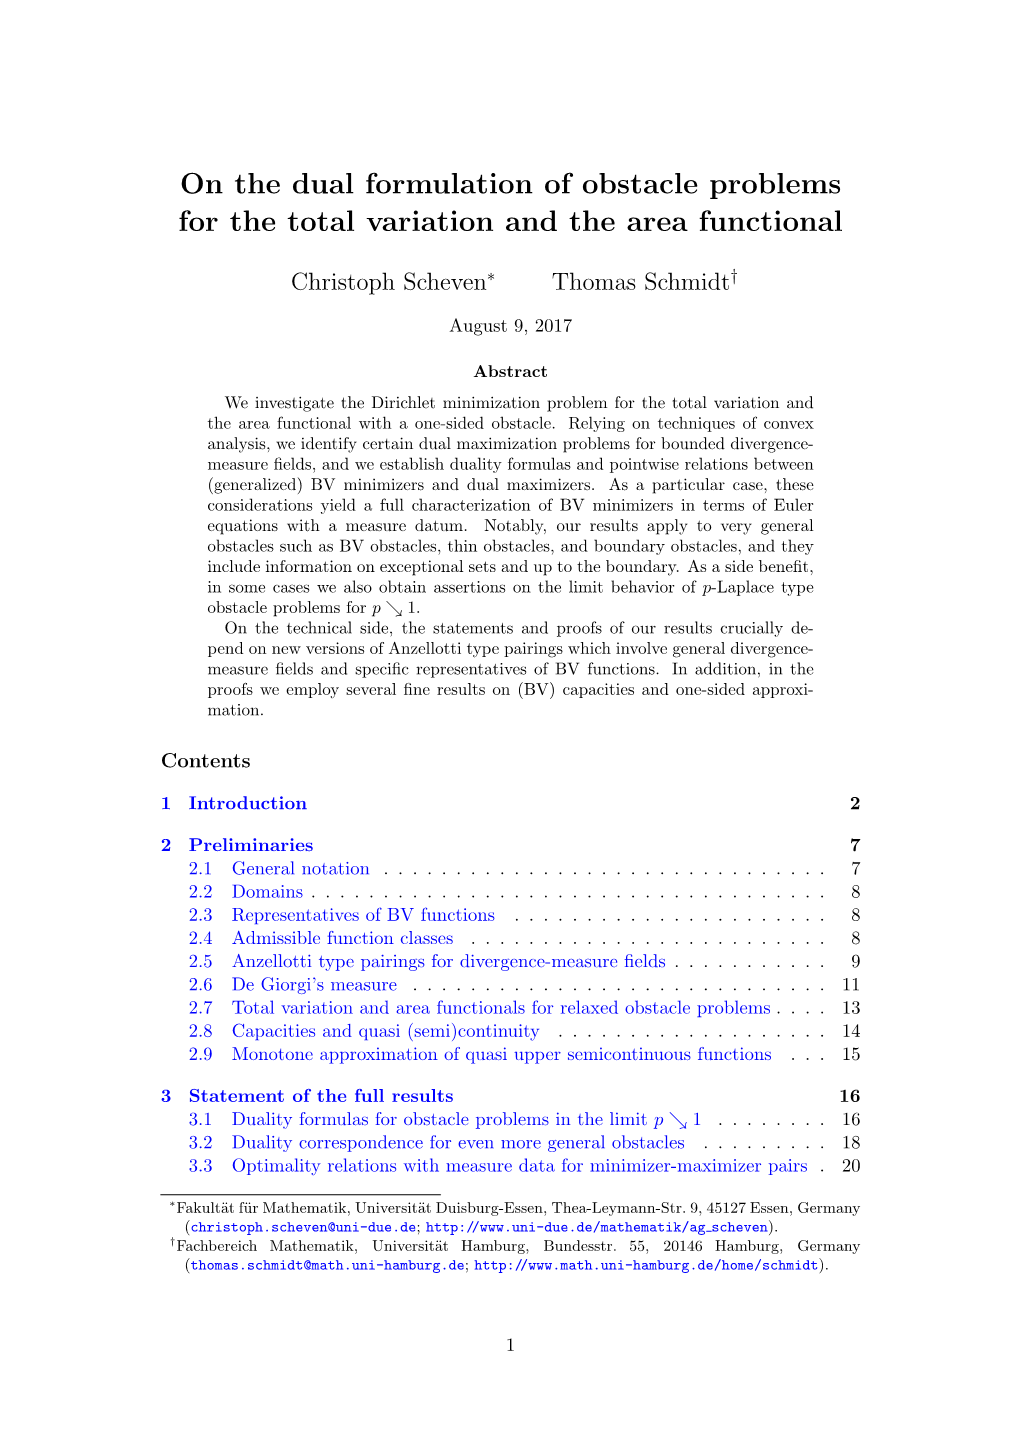 On the Dual Formulation of Obstacle Problems for the Total Variation and the Area Functional